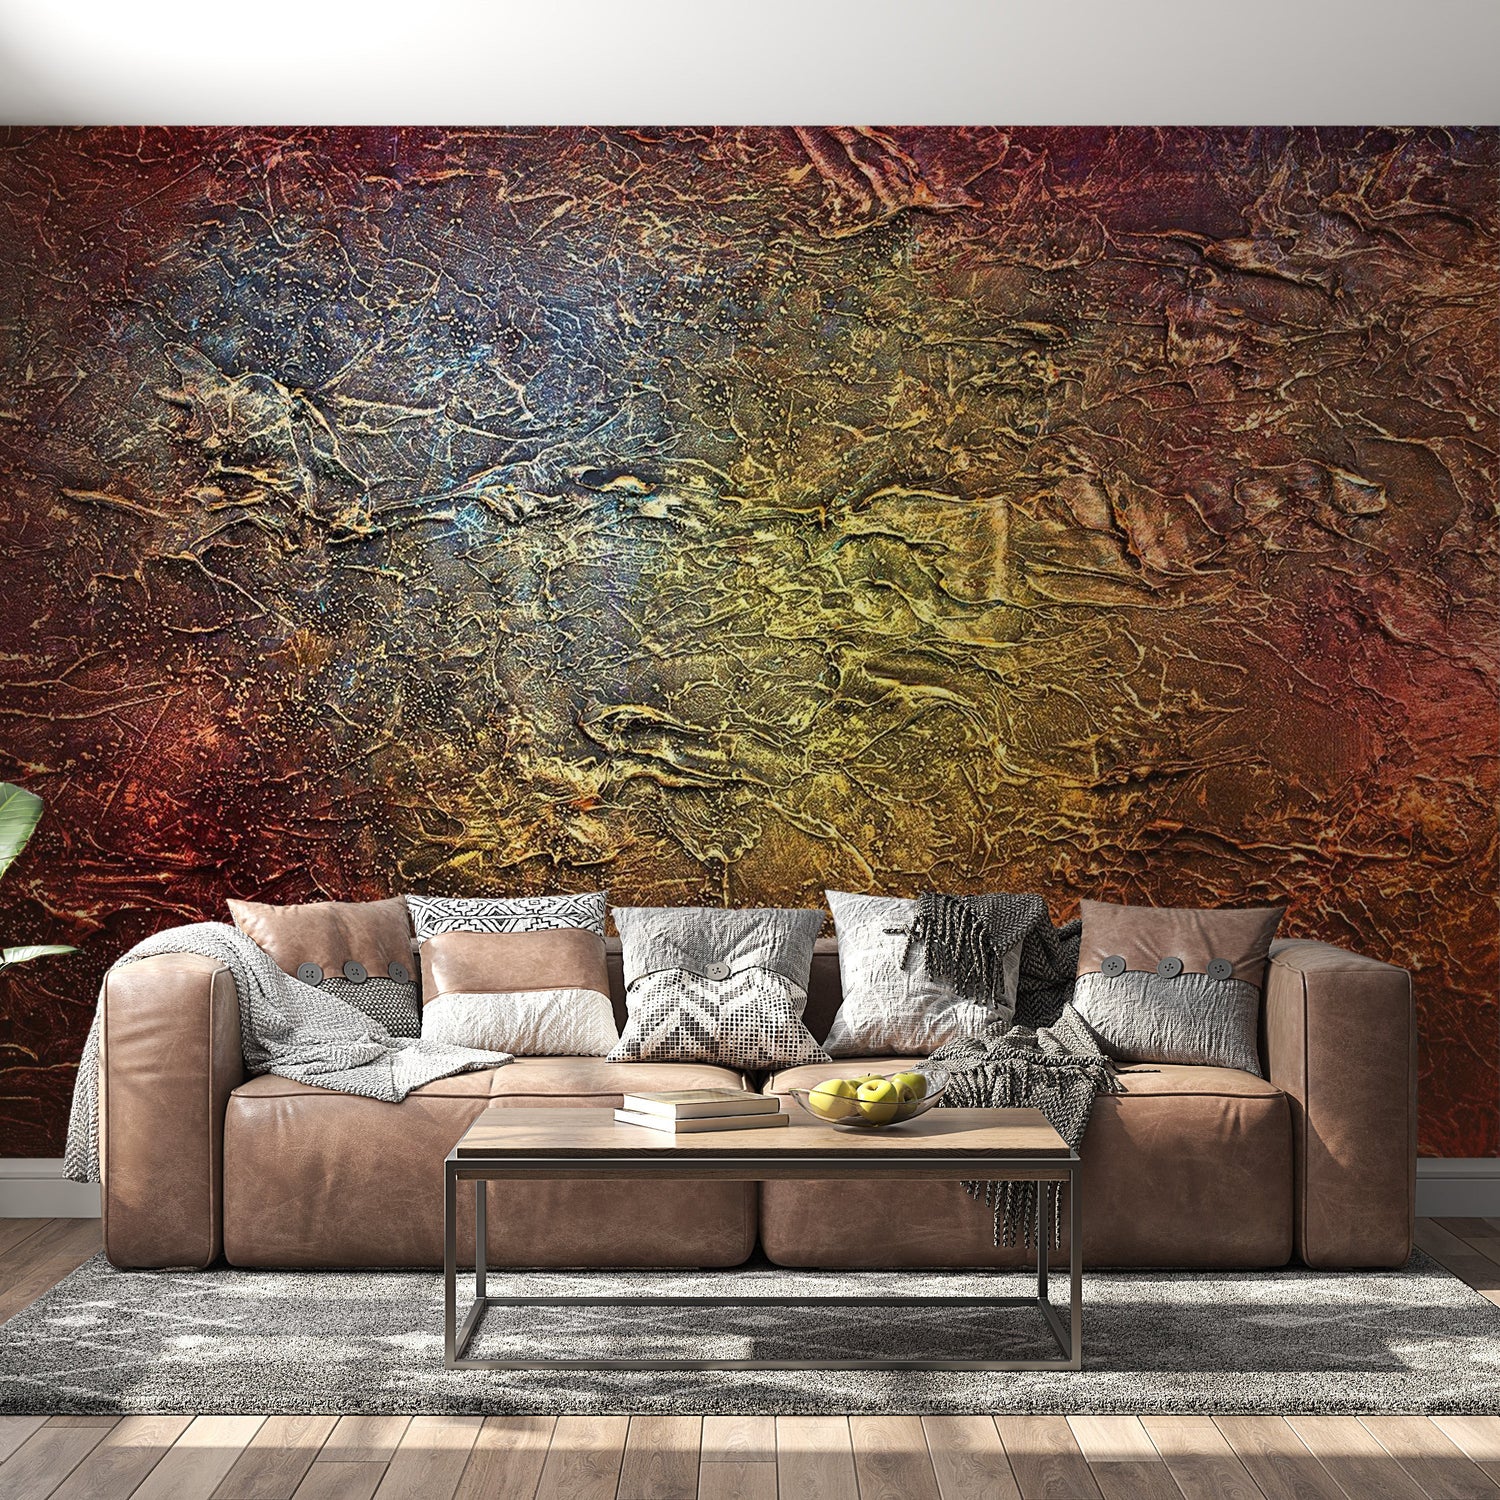 Peel & Stick Wall Mural - Red Gold Concrete Wall - Removable Wall Decals